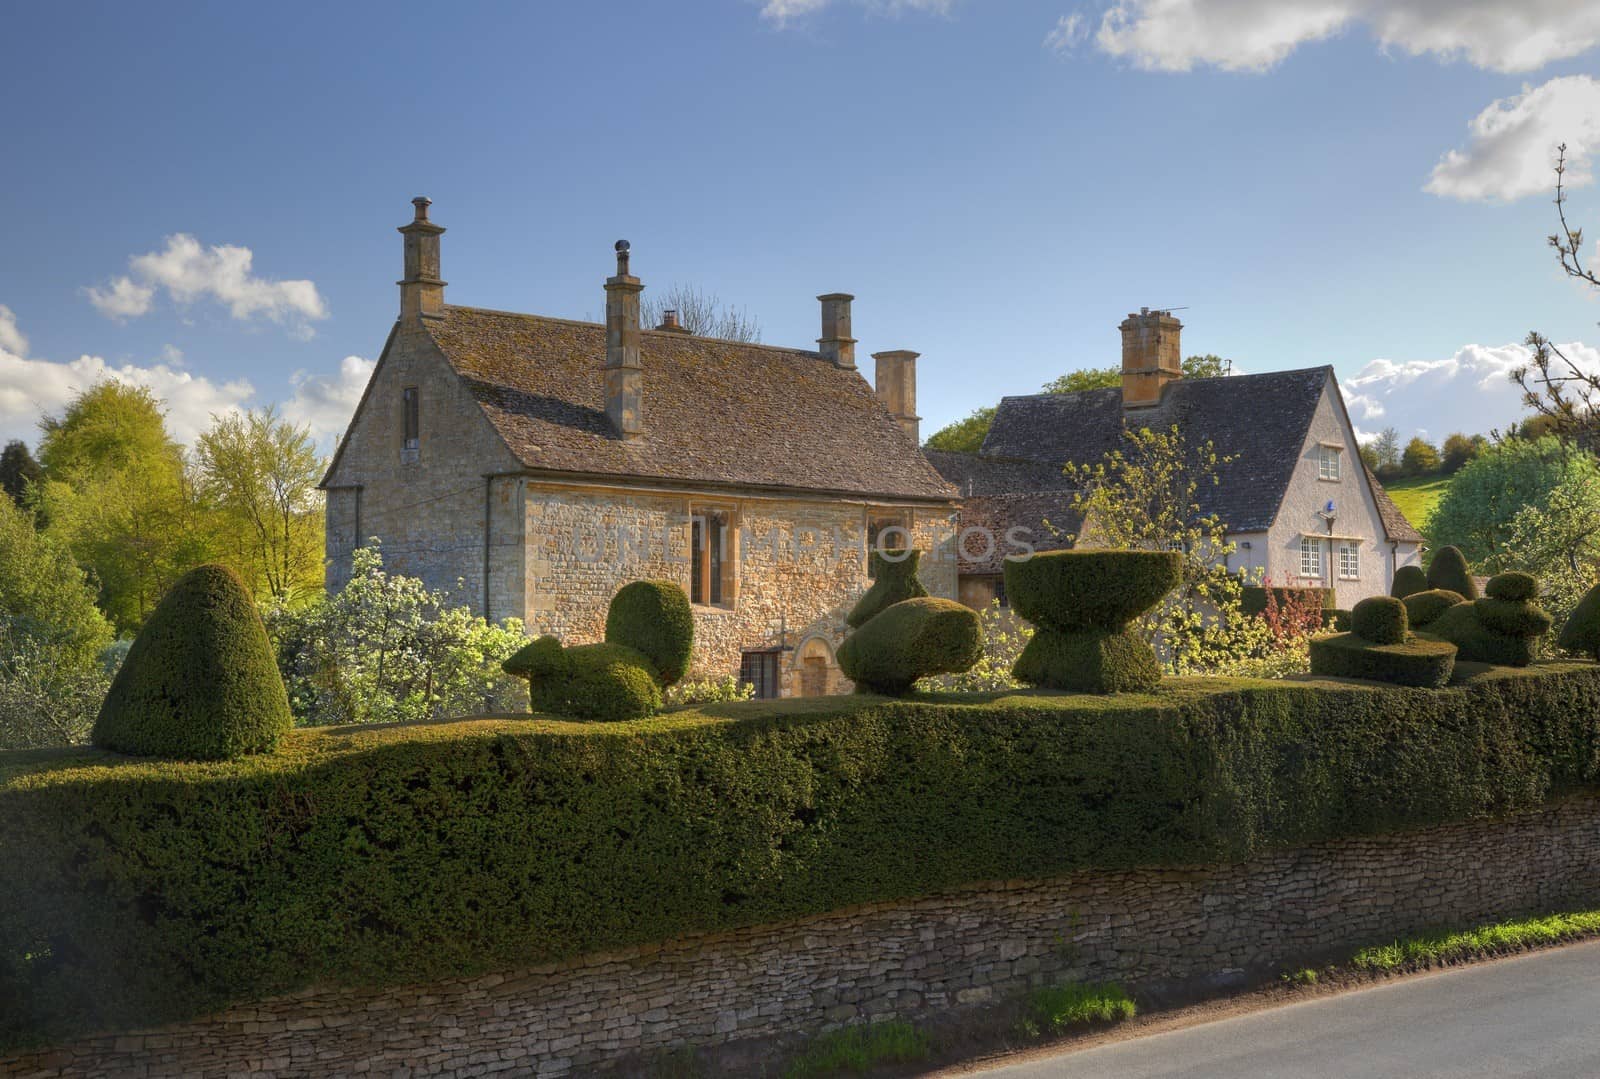 Cotswold property in the small village of Broad Campden near Chipping Campden, Gloucestershire, England.